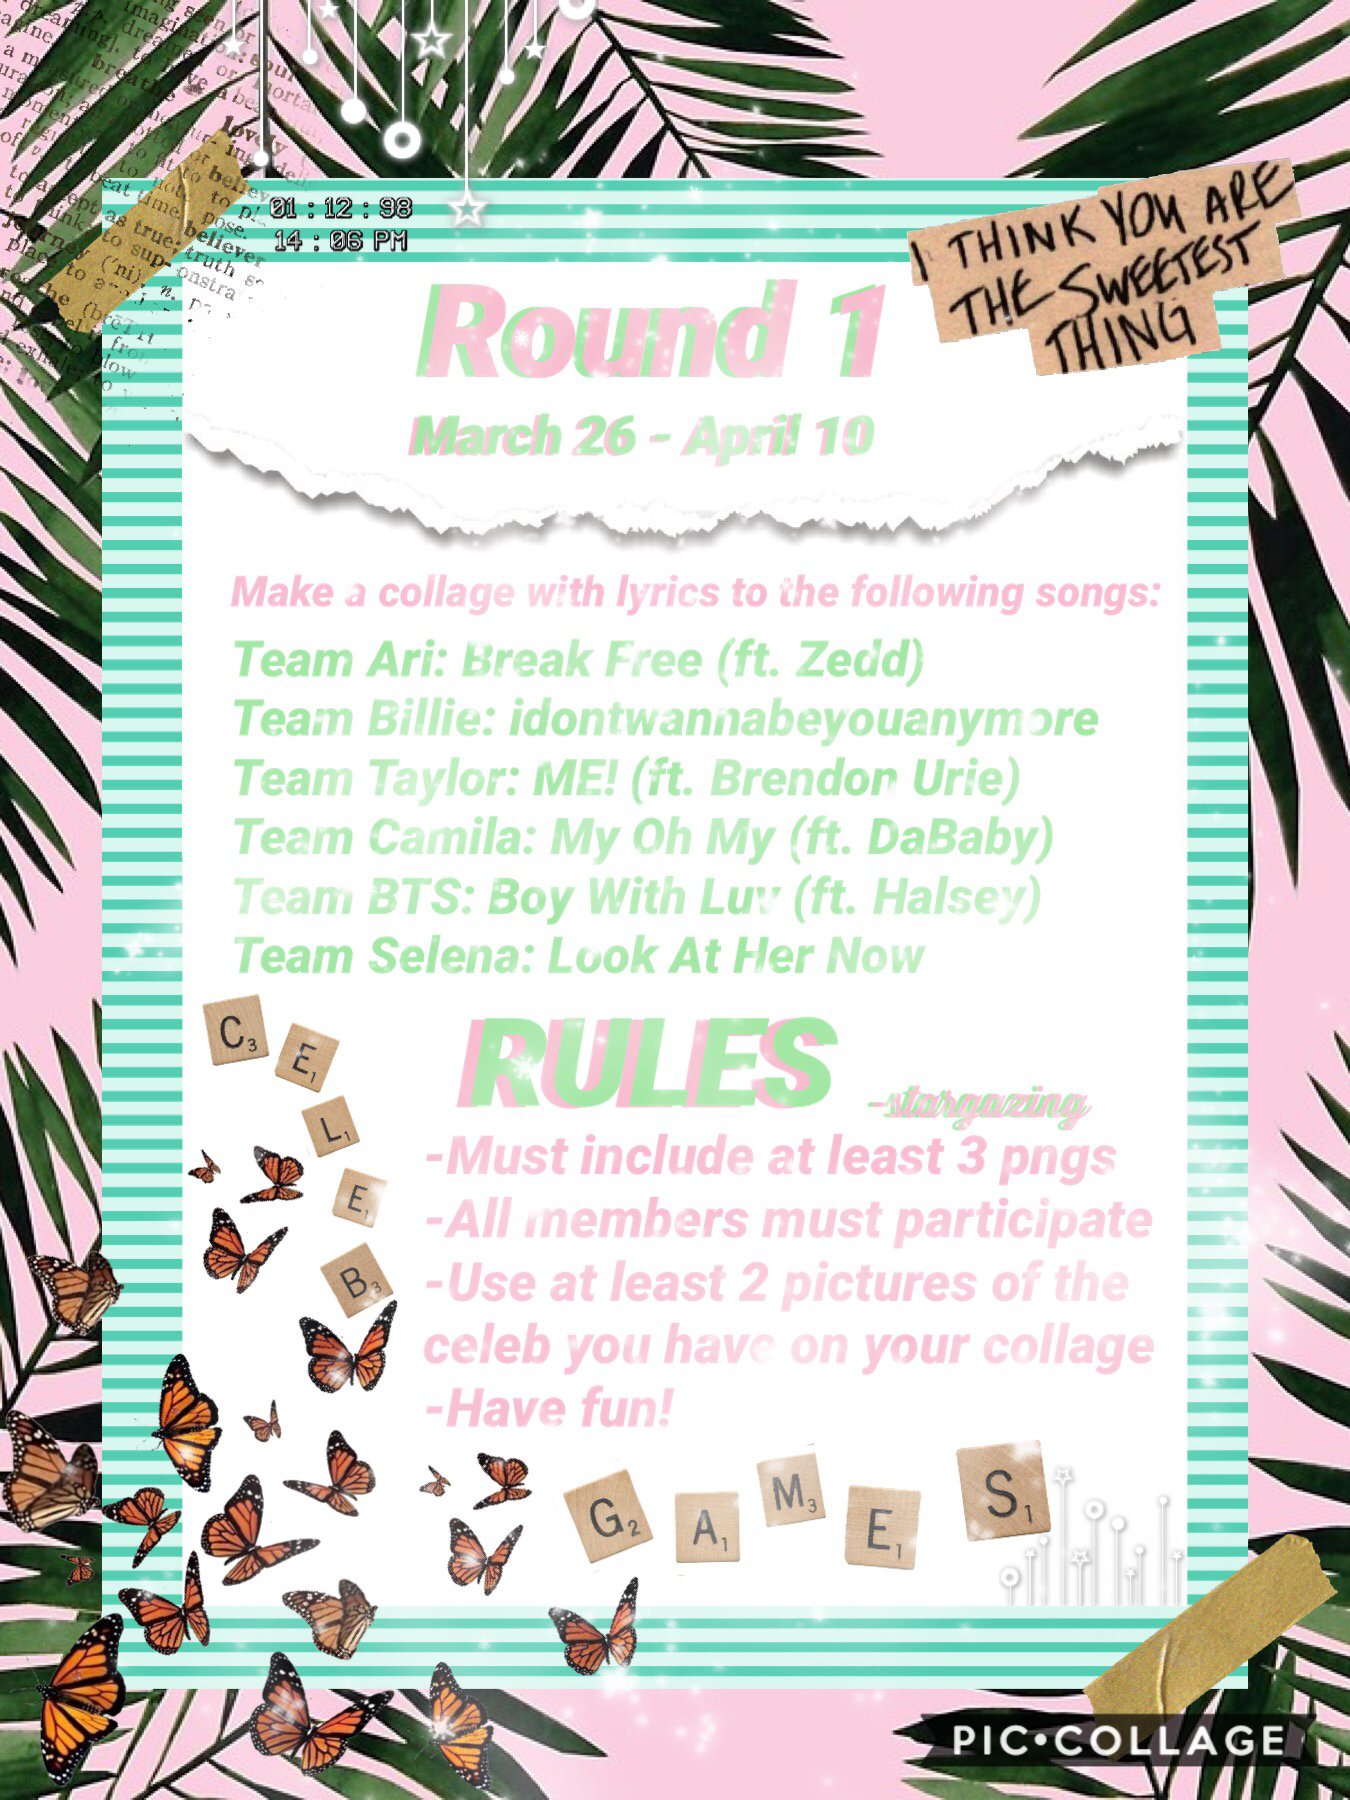 ✨t a p✨
Hey ✨STARGAZERS ✨
round one for celeb games is out!
Please contact your teammates so 
you can start working! This is due April 10.
Also, I will be posting a chatpage in the remixes
for anyone who has any questions! Love ya!